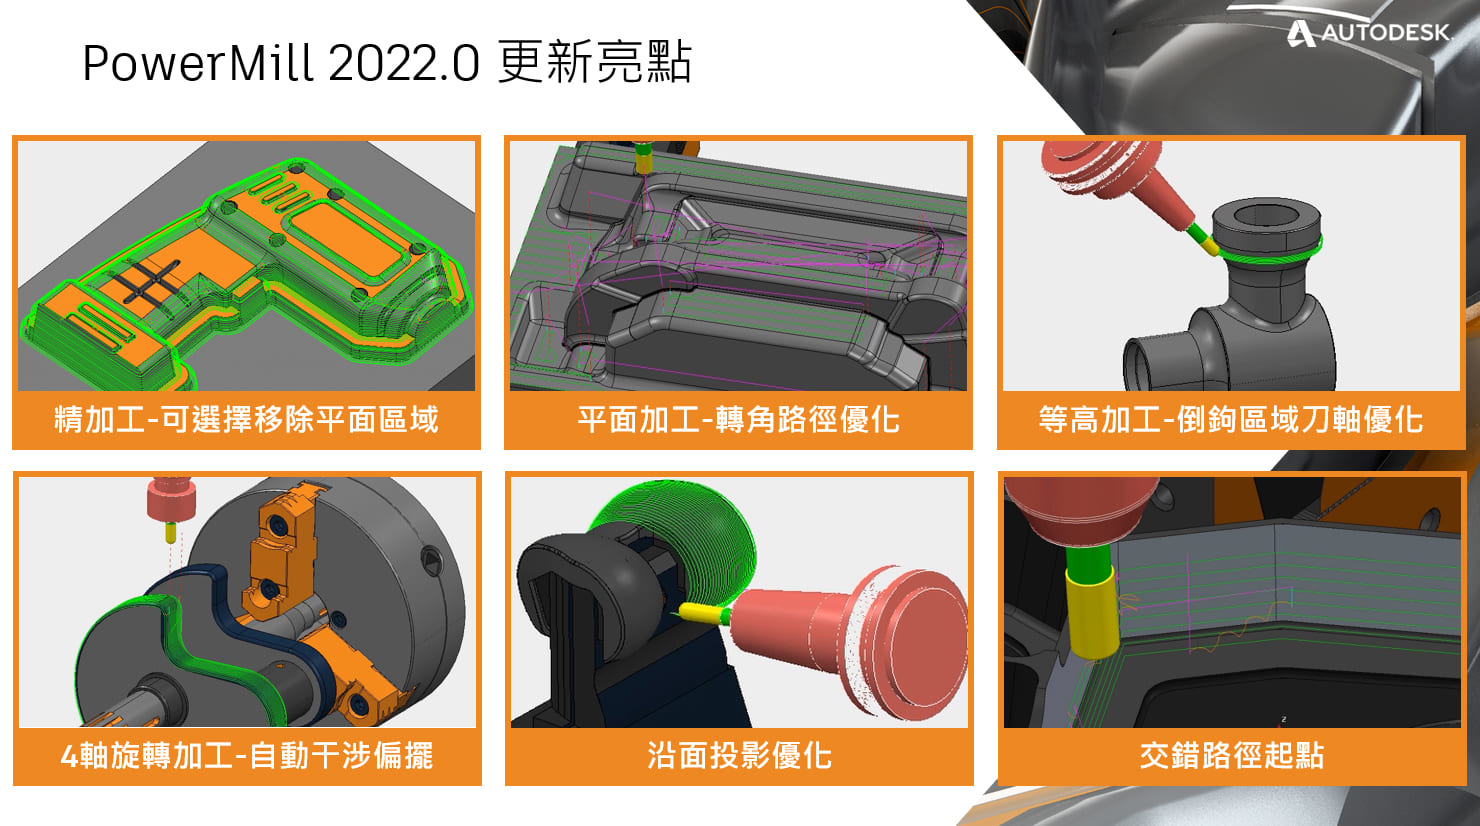 You are currently viewing PowerMILL 2022 更新亮點